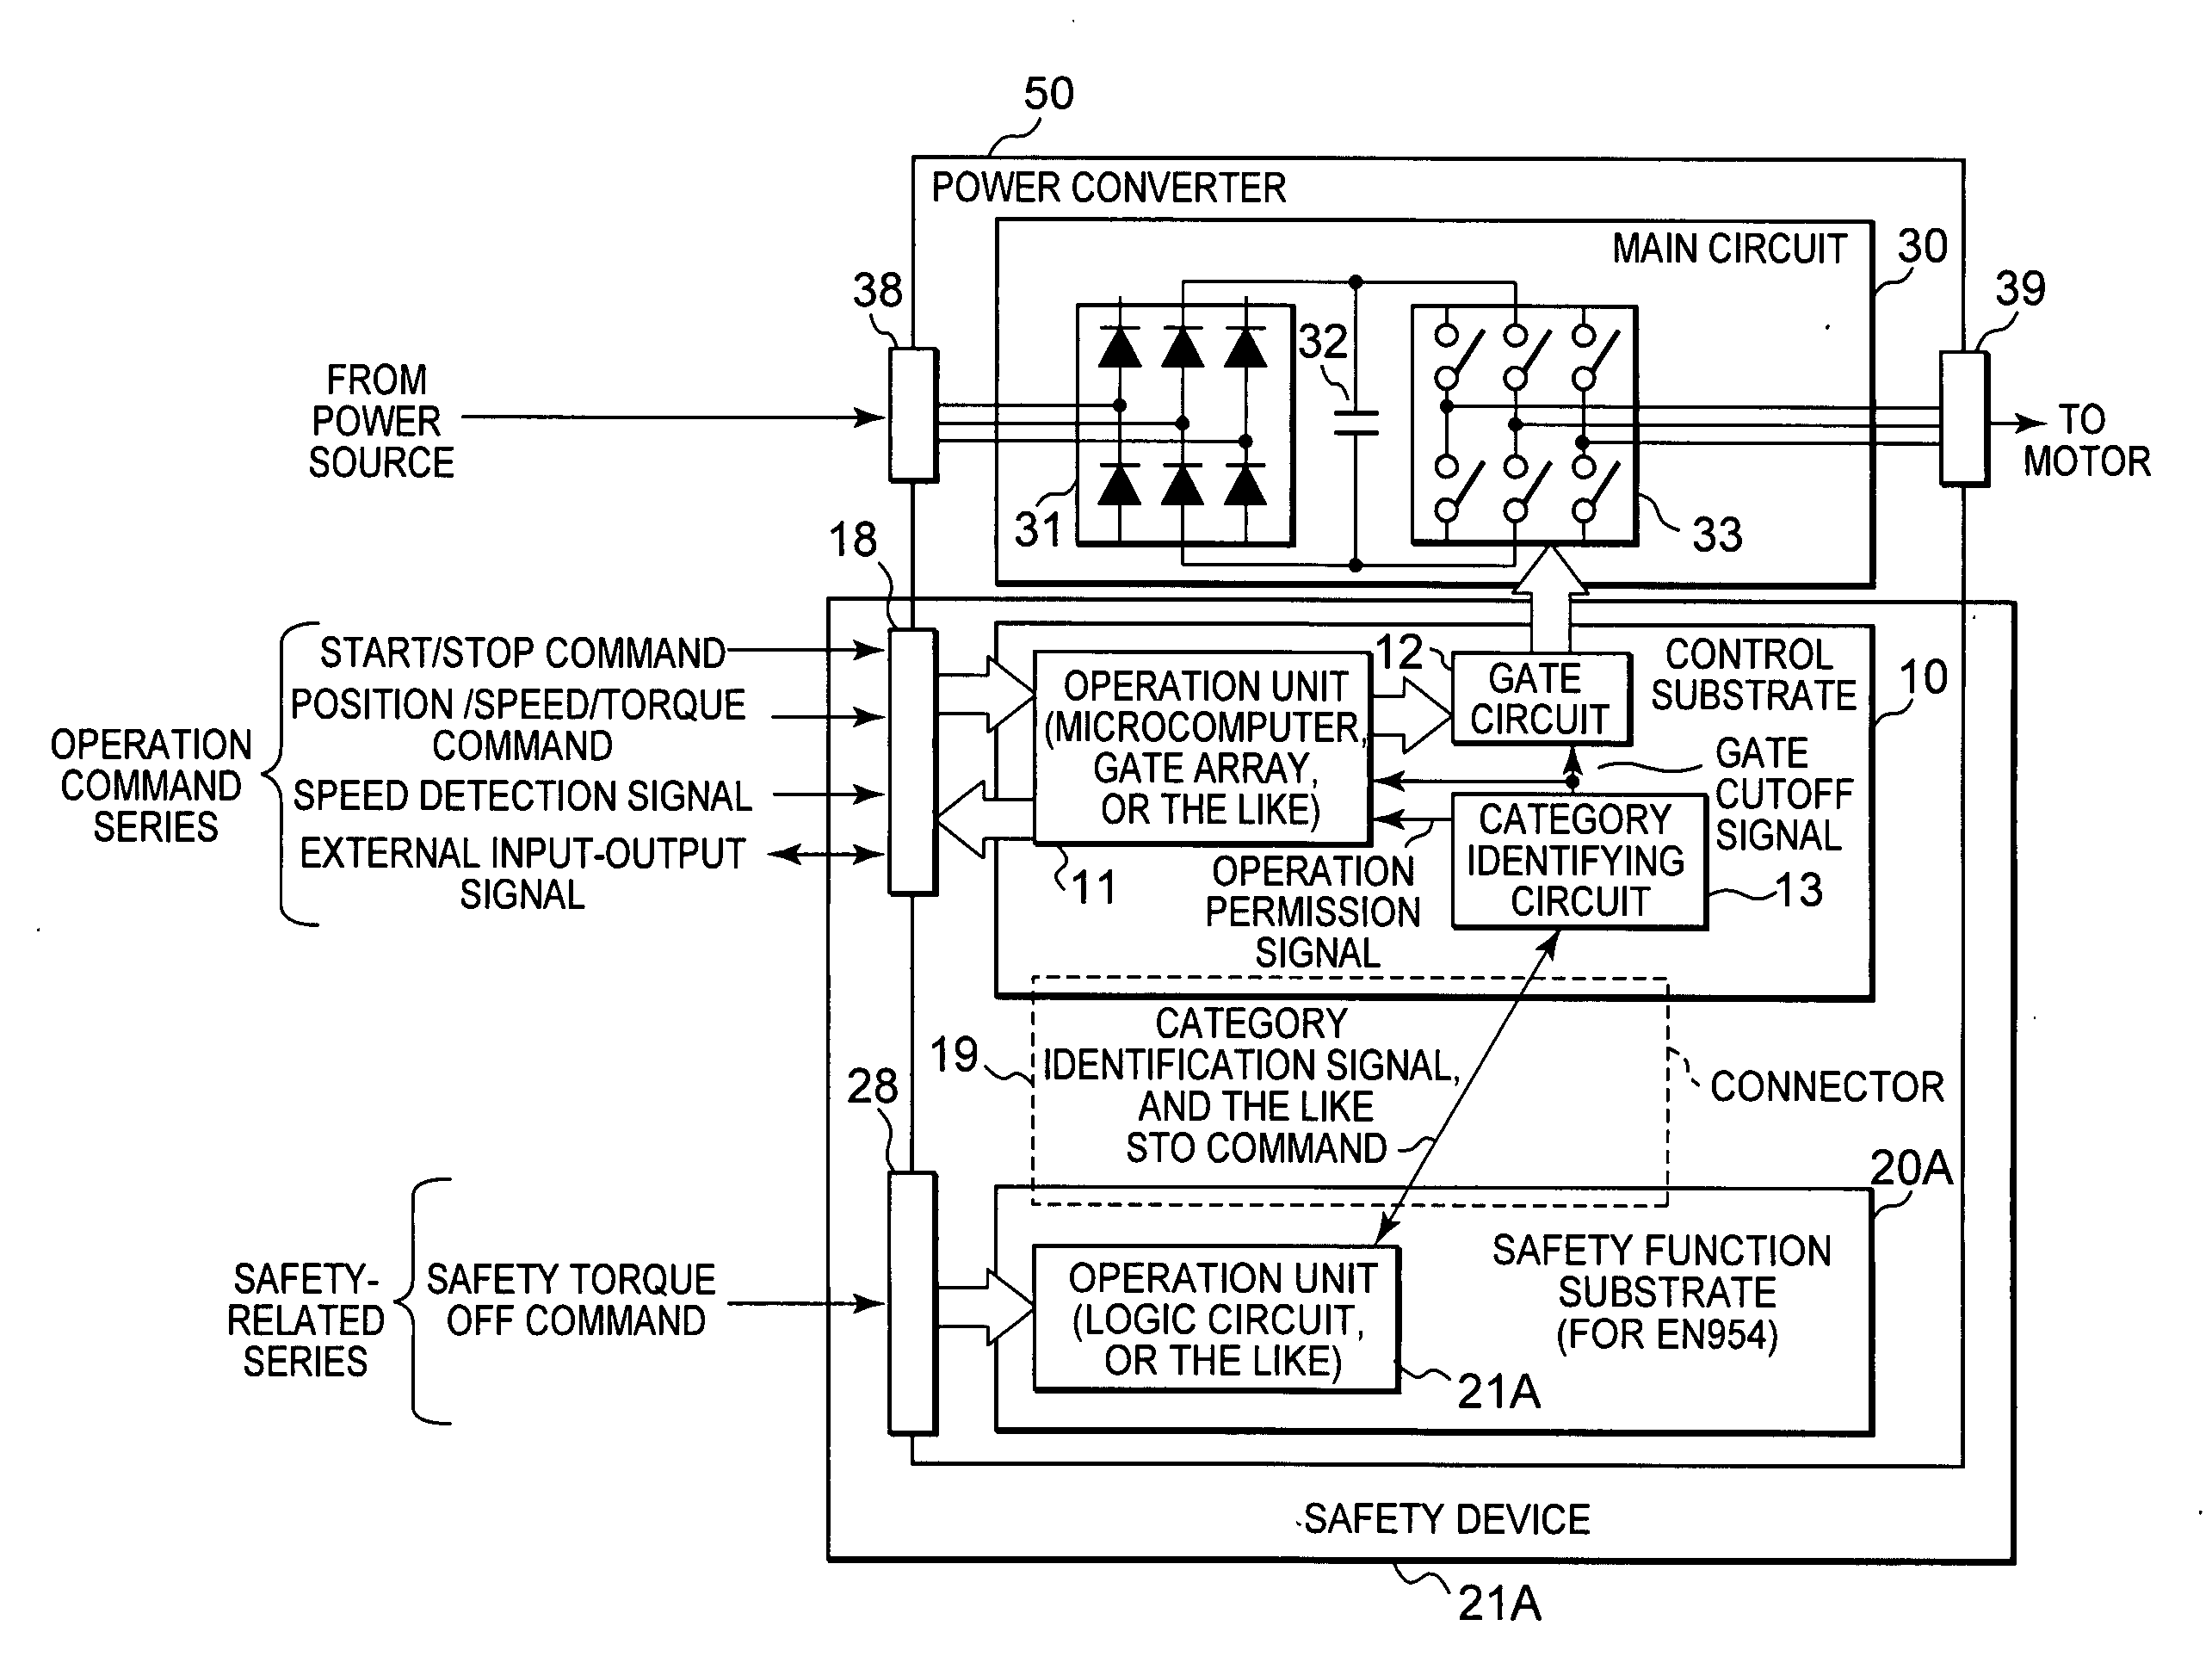 Safety device and power converter